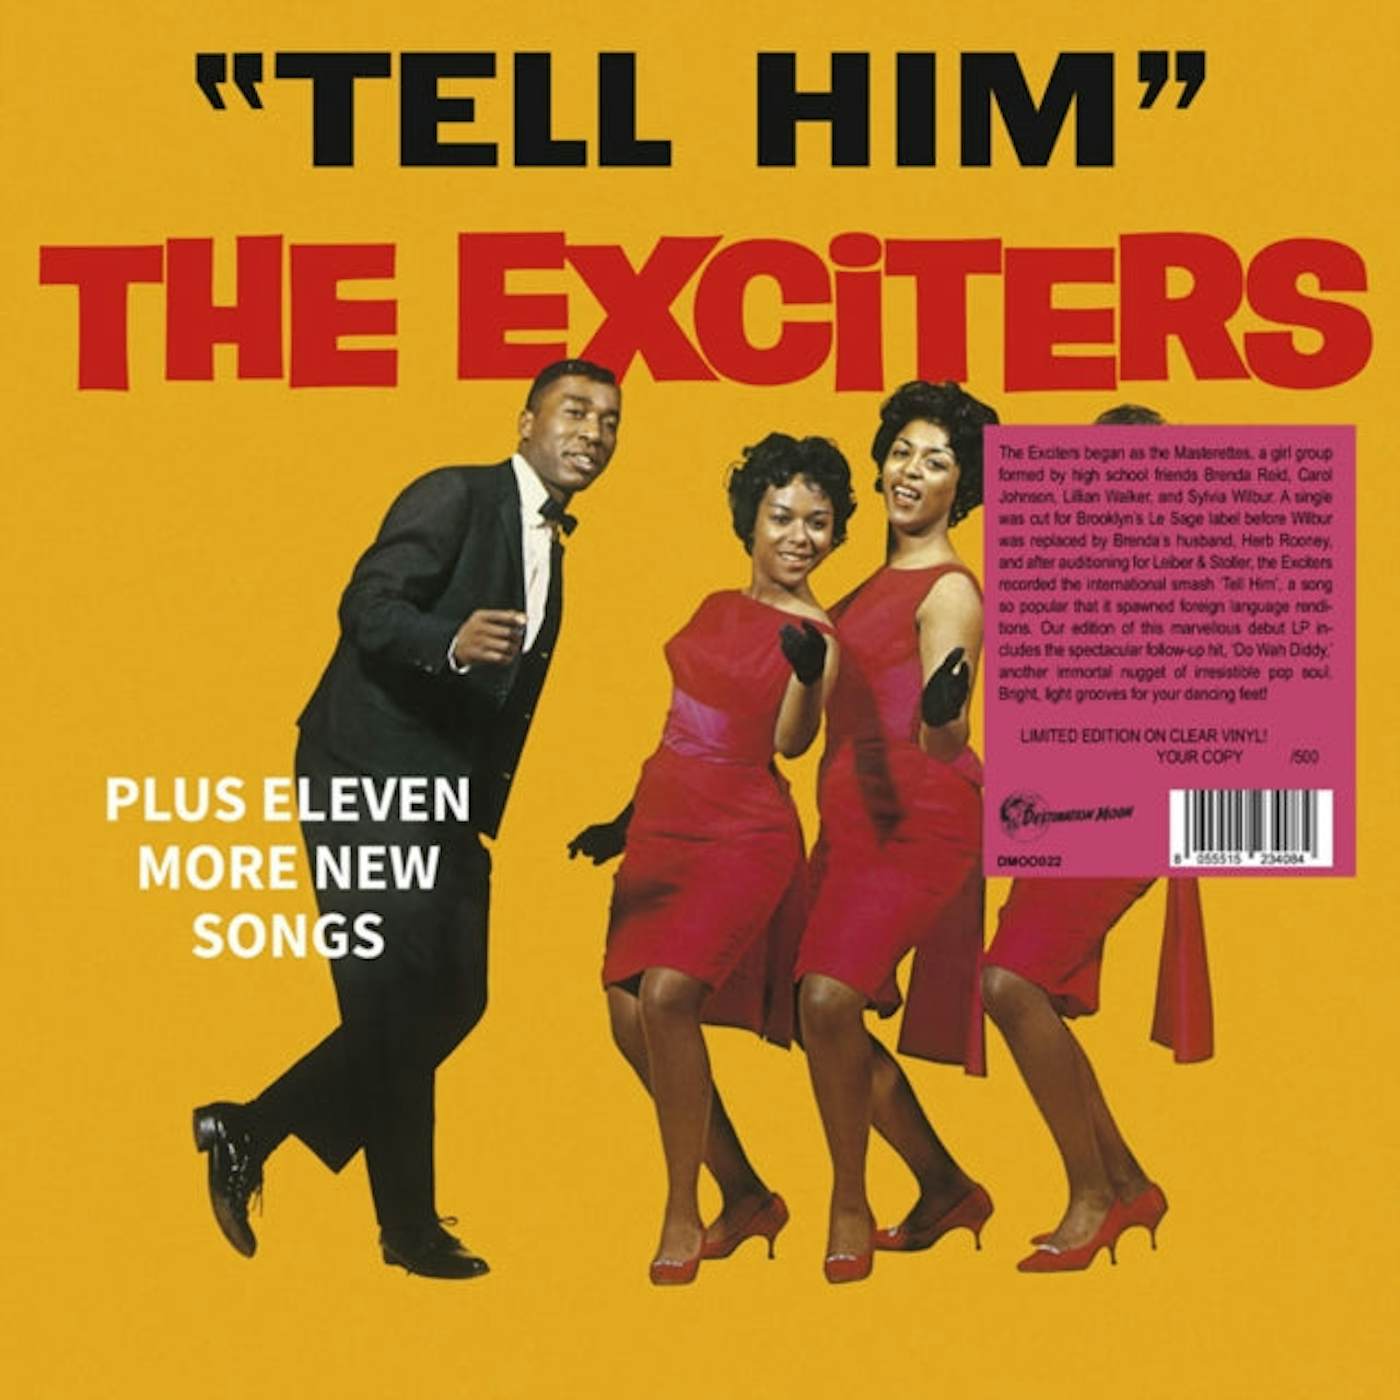 The Exciters LP Vinyl Record - Tell Him (Clear Vinyl)